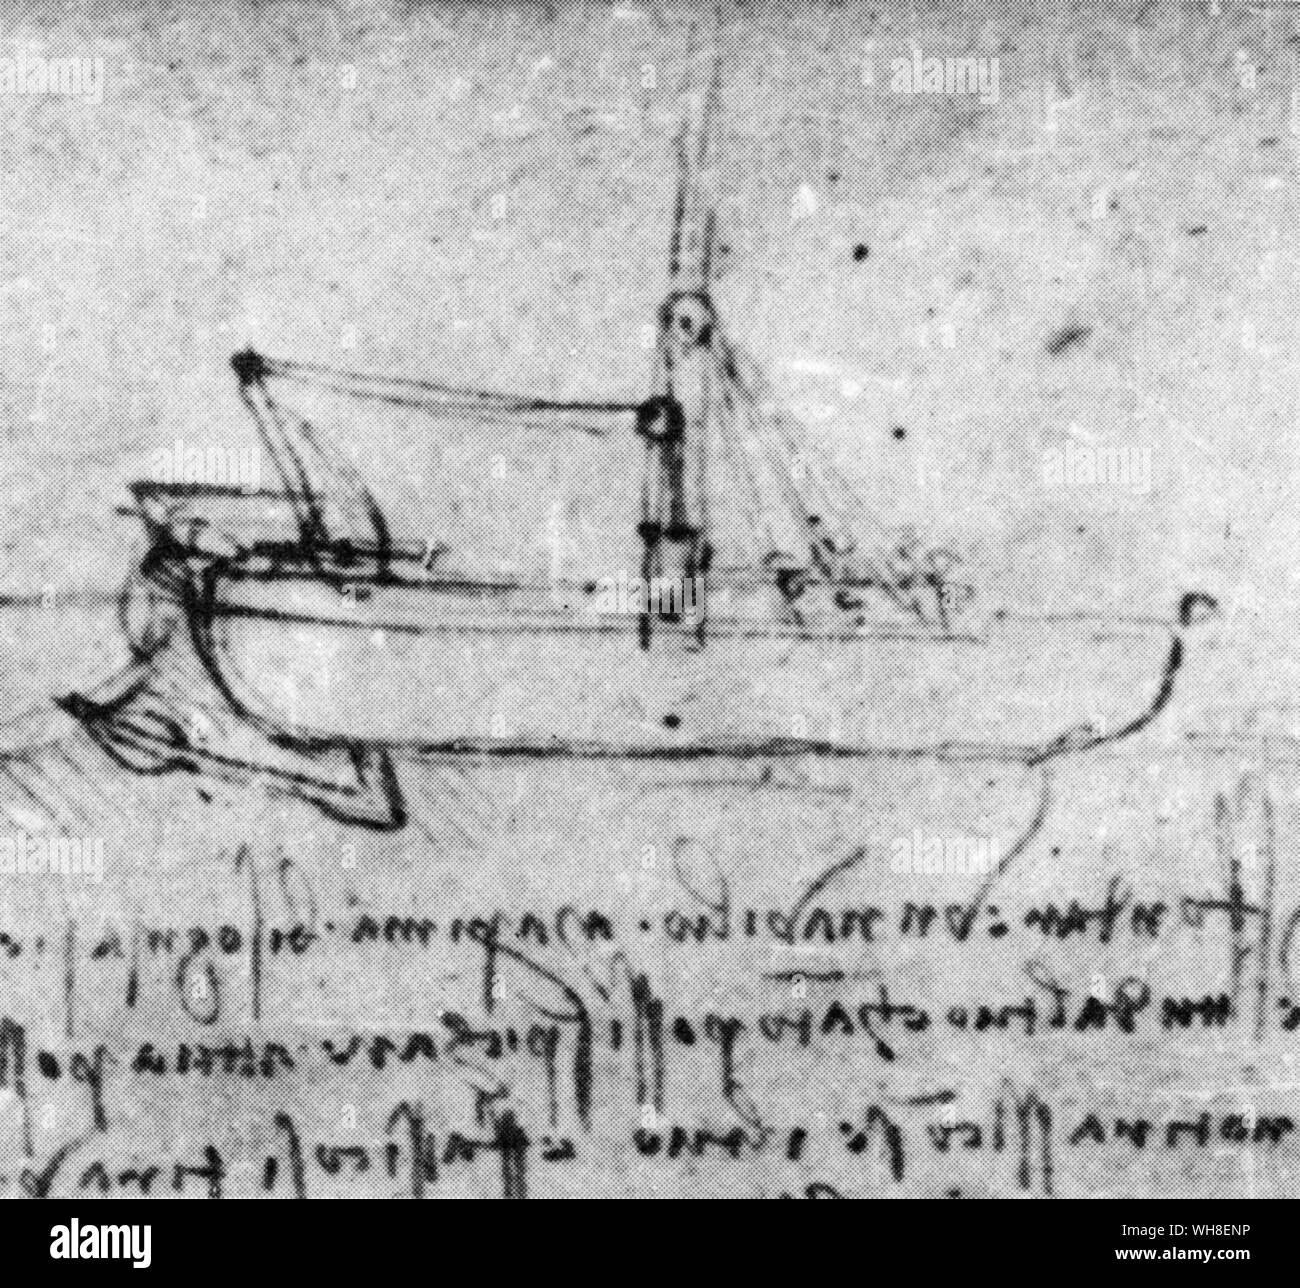 If it should happen that the fight was at sea I have plans for many engines'. The ship has a holing mechanism hidden under the water. Leonardo da Vinci (1452-1519) was an Italian Renaissance architect, musician, anatomist, inventor, engineer, sculptor, geometer and painter. . . Stock Photo